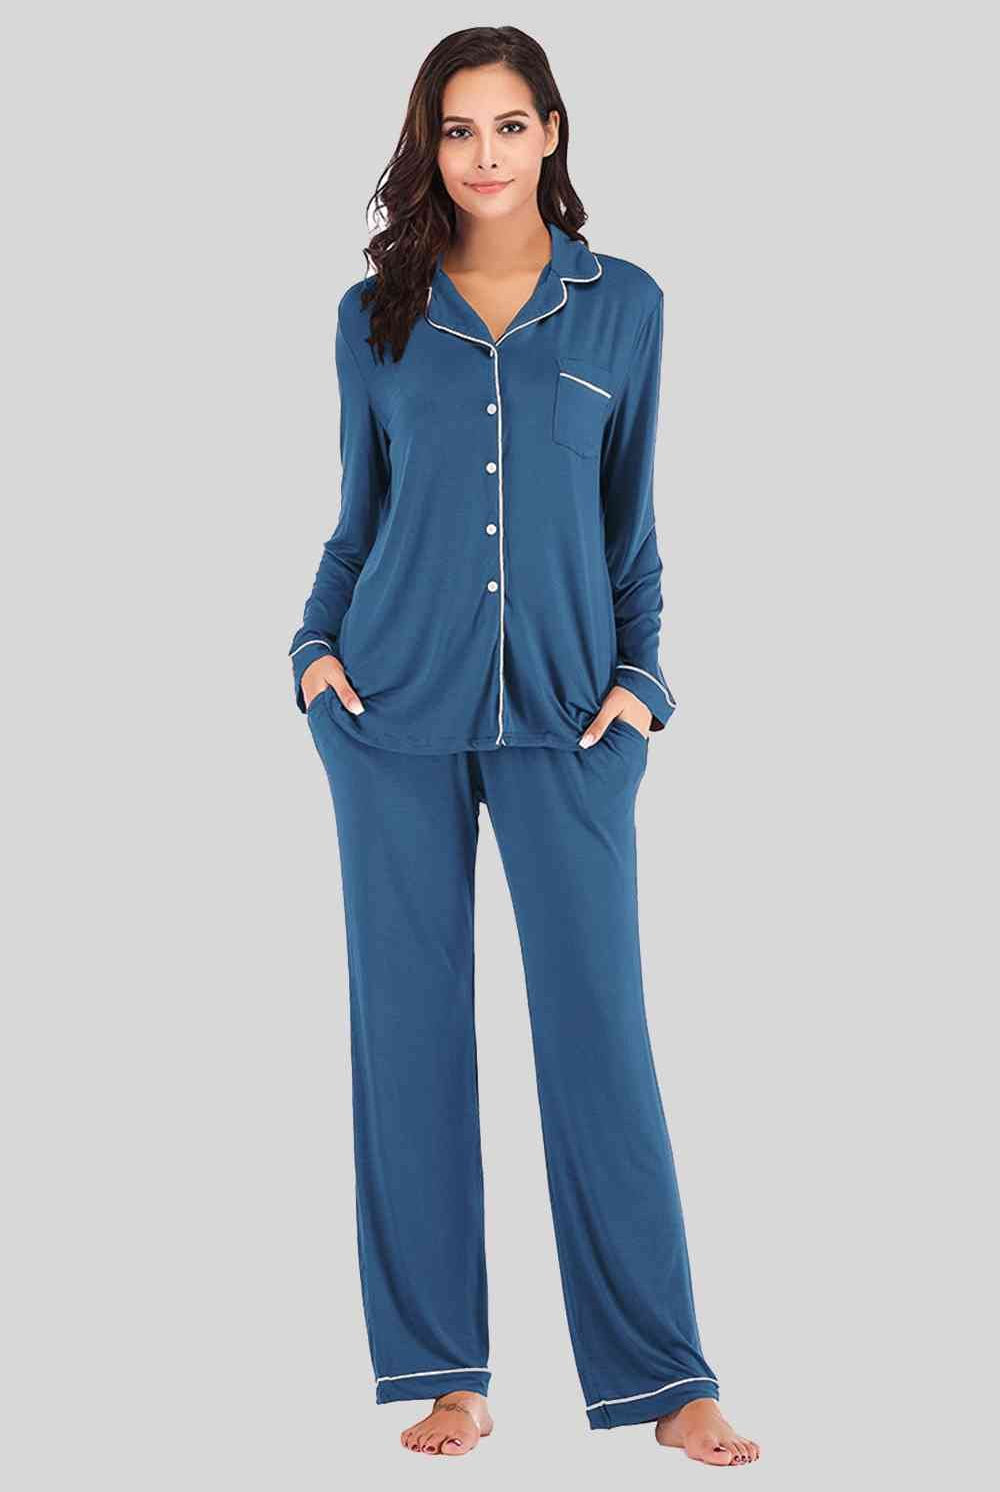 Collared Neck Long Sleeve Loungewear Set with Pockets - GemThreads Boutique